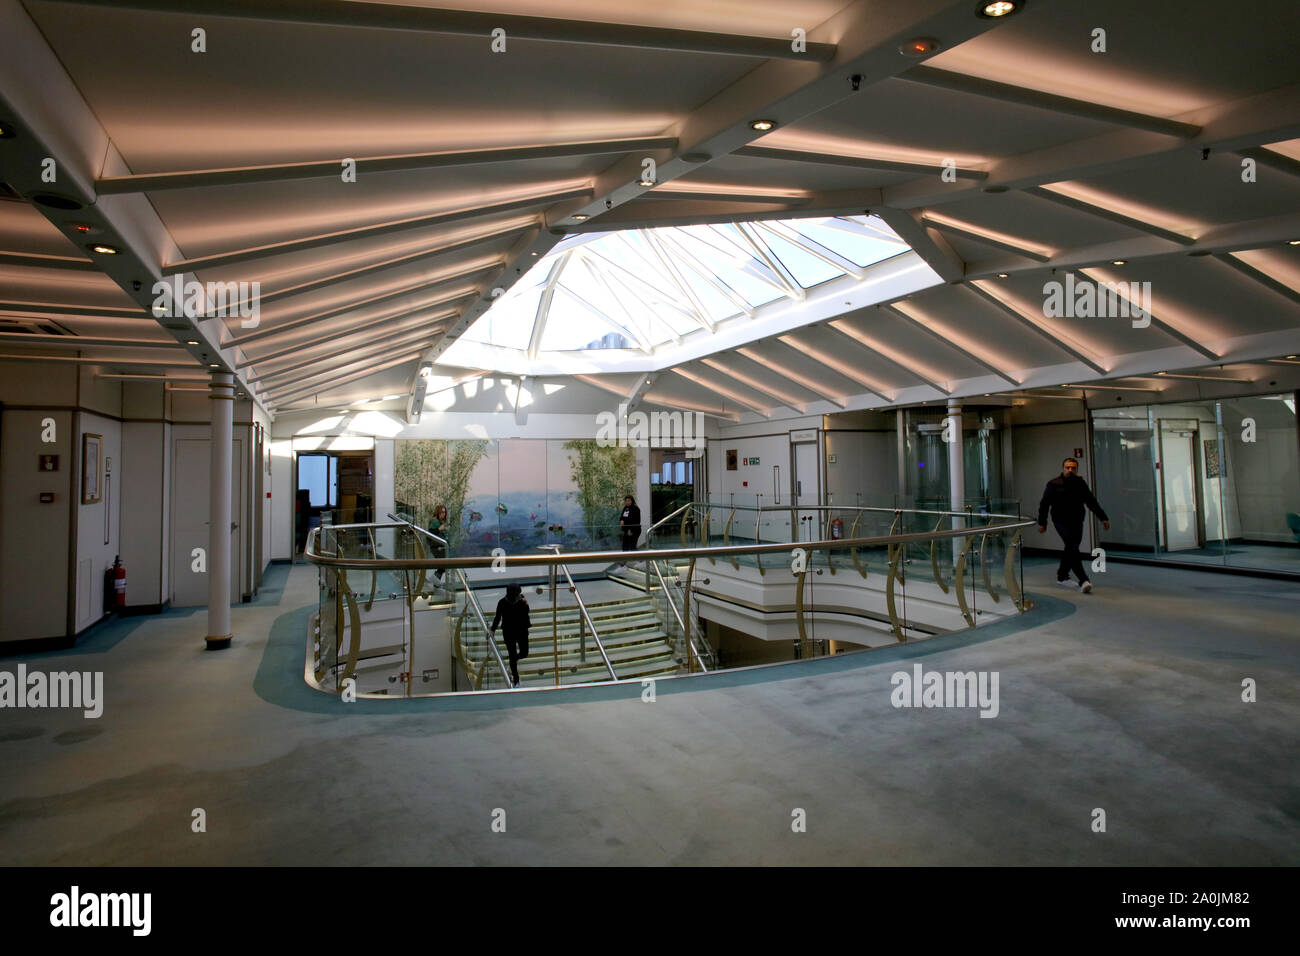 Buenos Aires, Argentina - September 15, 2019:  Lobby of the Buquebus boat sailing from Buenos Aires to Montevideo Stock Photo